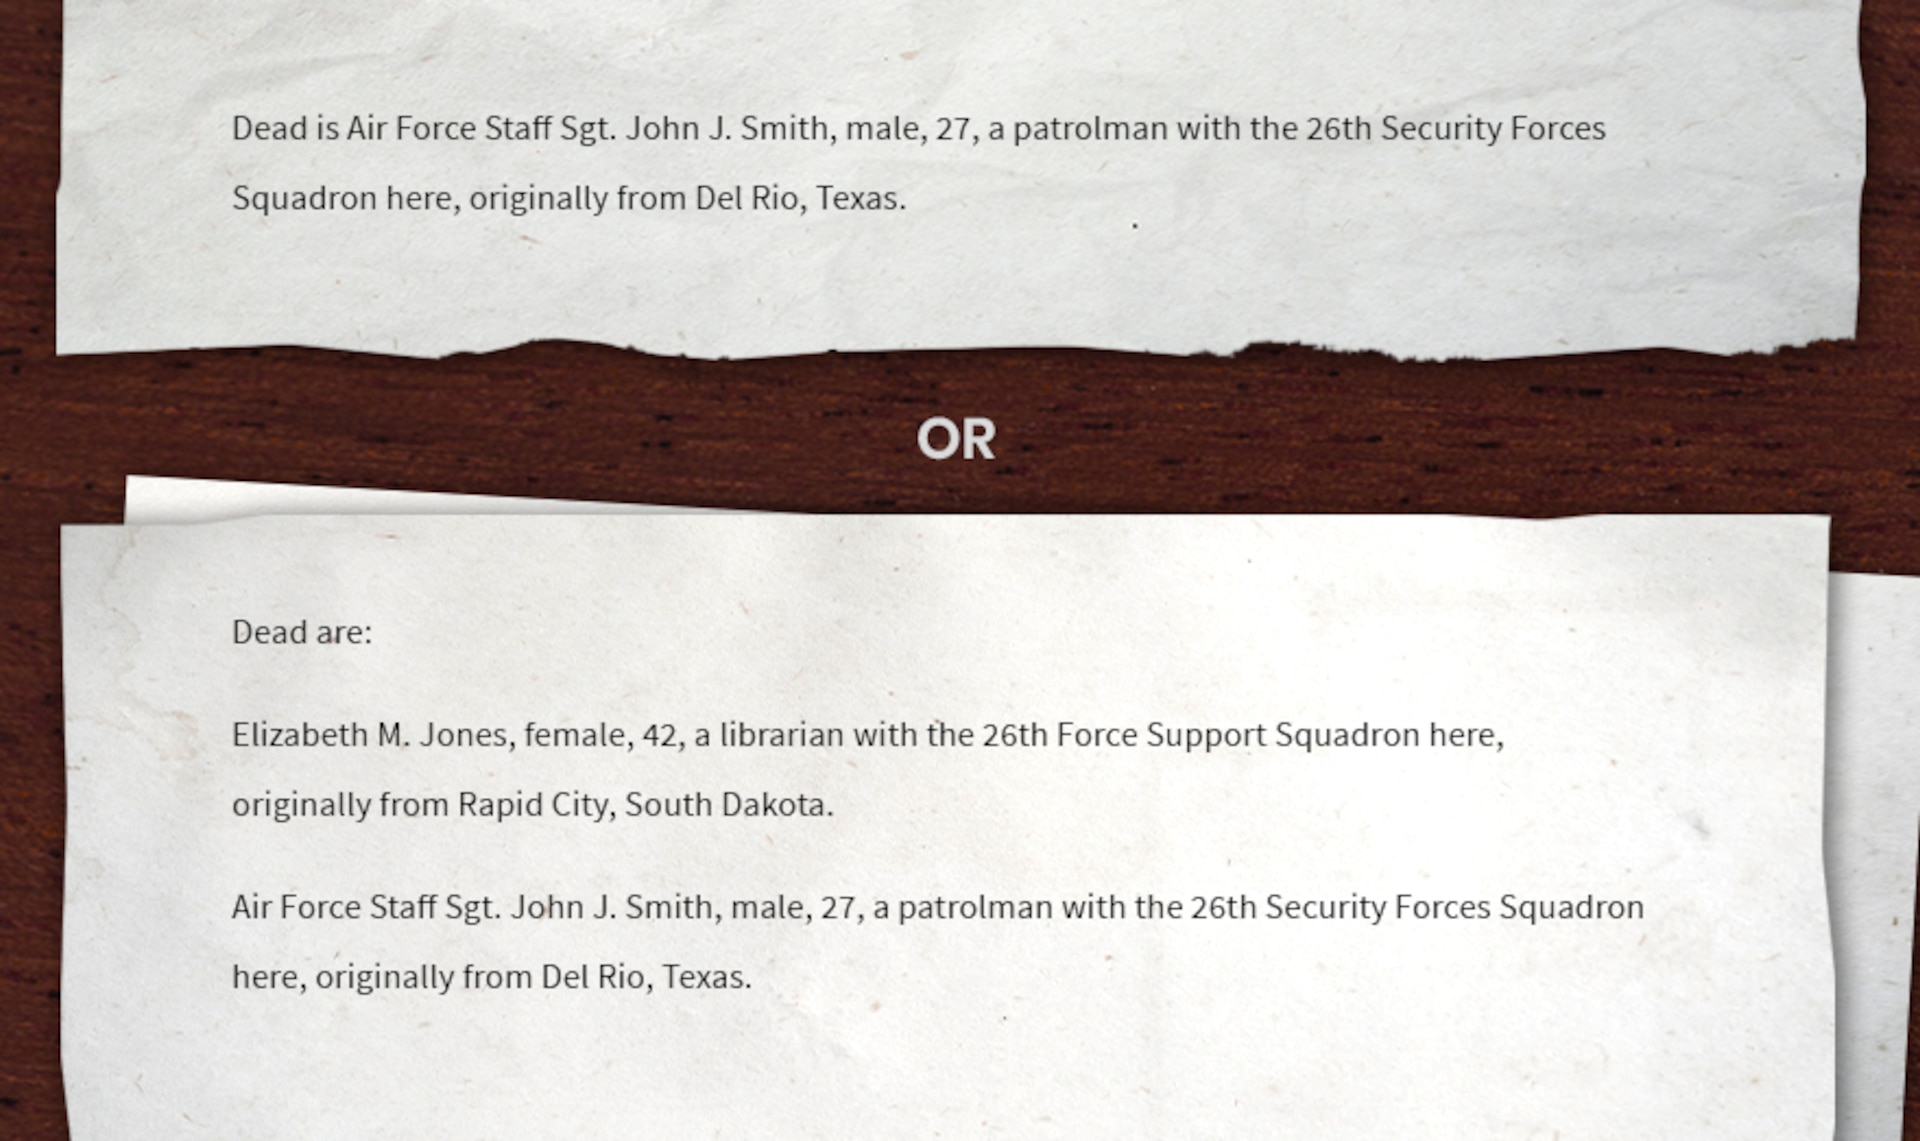 Writing sample of a bridge sentence for deceased: Dead is Air Force Staff Sgt. John J. Smith, male, 27, a patrolman with the 26th Security Forces Squadron here, originally from Del Rio, Texas. Or Dead are: Elizabeth M. Jones, female, 42, a librarian with the 26th Force Support Squadron here, originally from Rapid City, South Dakota. Air Force Staff Sgt. John J. Smith, male, 27, a patrolman with the 26th Security Forces Squadron here, originally from Del Rio, Texas.